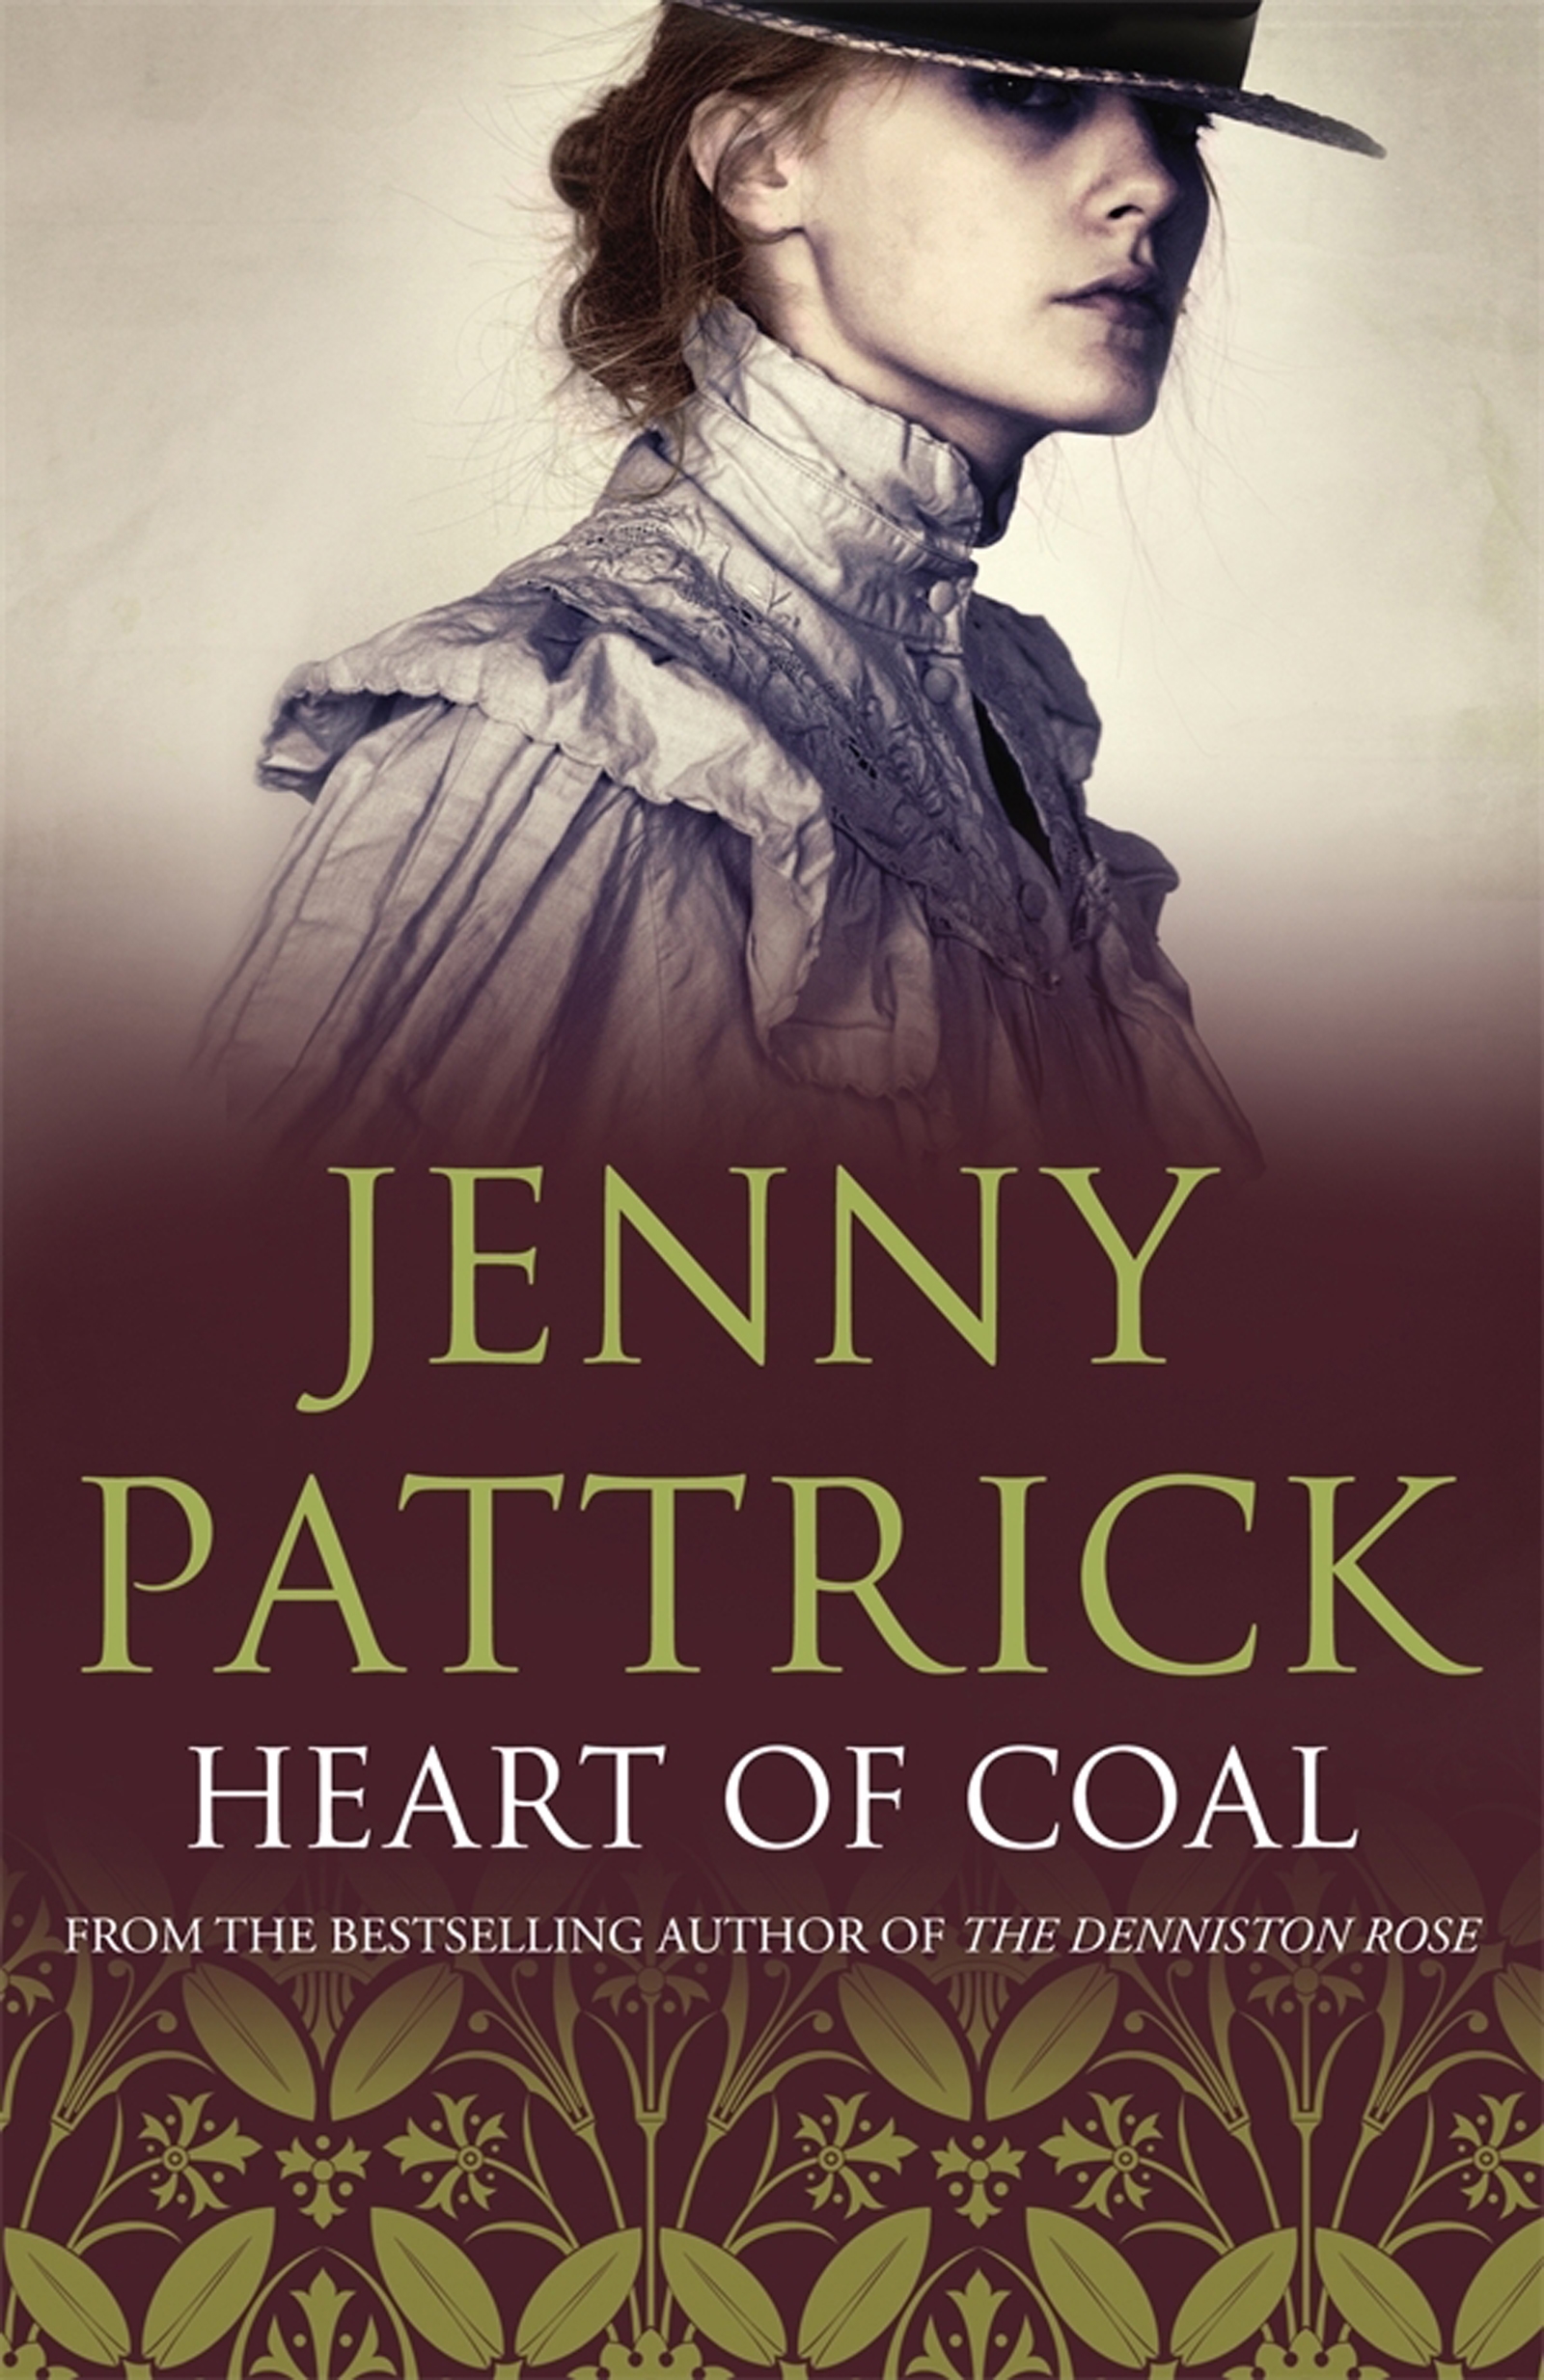 Heart of Coal by Jenny Pattrick - Penguin Books New Zealand